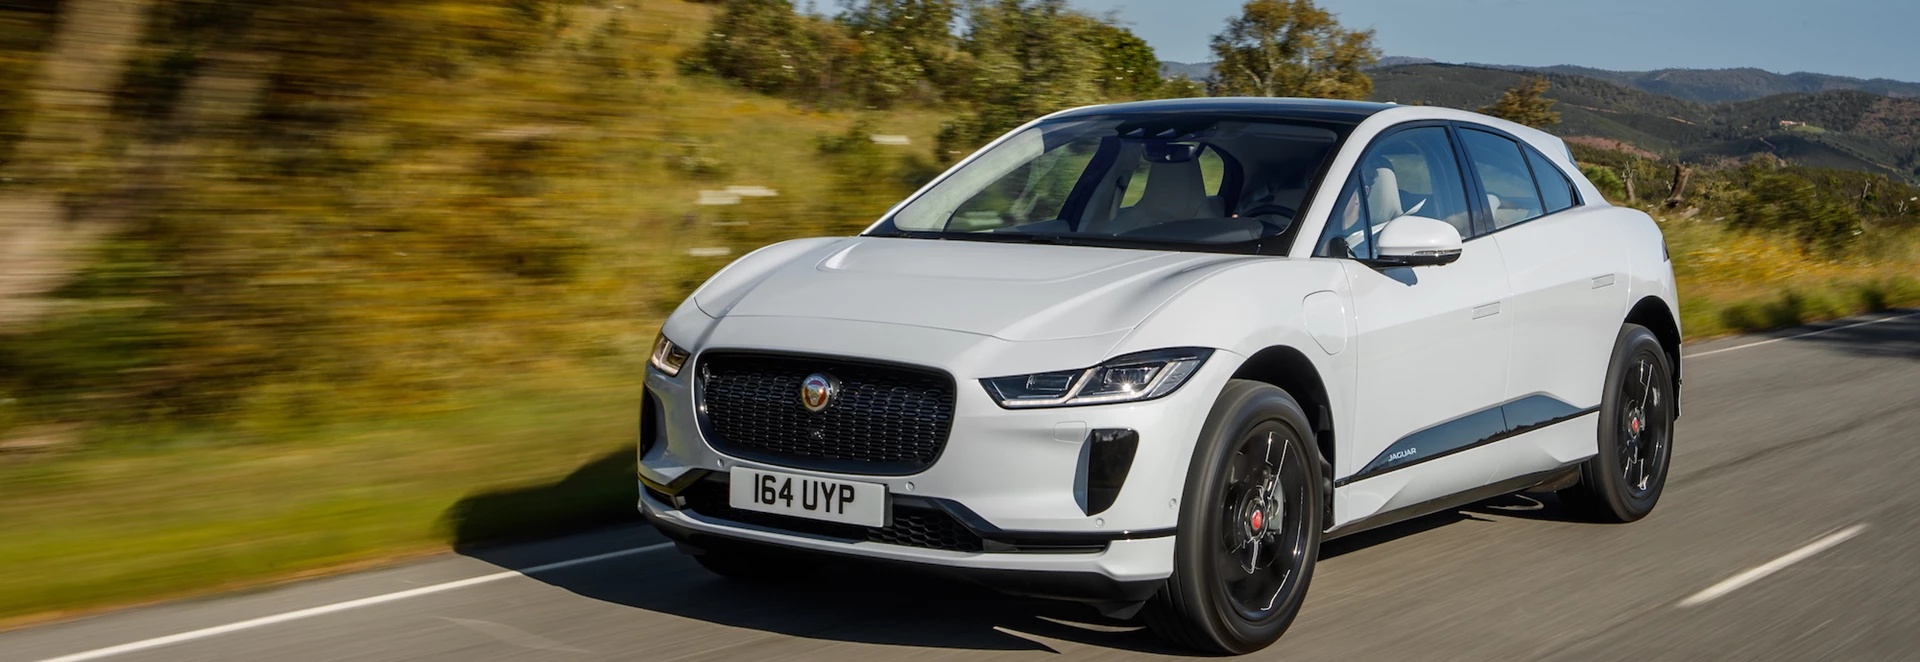 Jaguar I-Pace wins Auto Express Car of the Year 2018